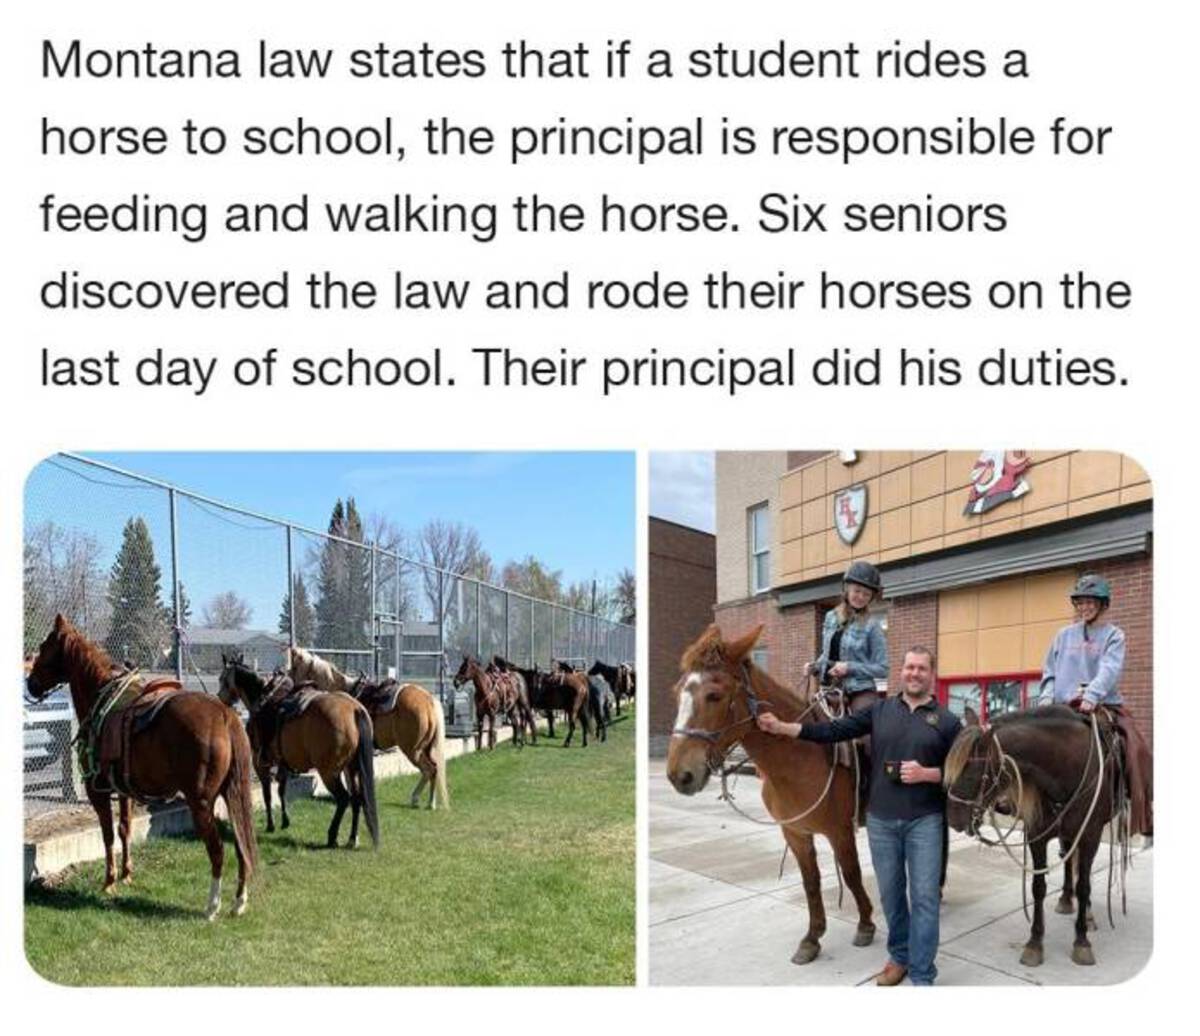 stallion - Montana law states that if a student rides a horse to school, the principal is responsible for feeding and walking the horse. Six seniors discovered the law and rode their horses on the last day of school. Their principal did his duties.